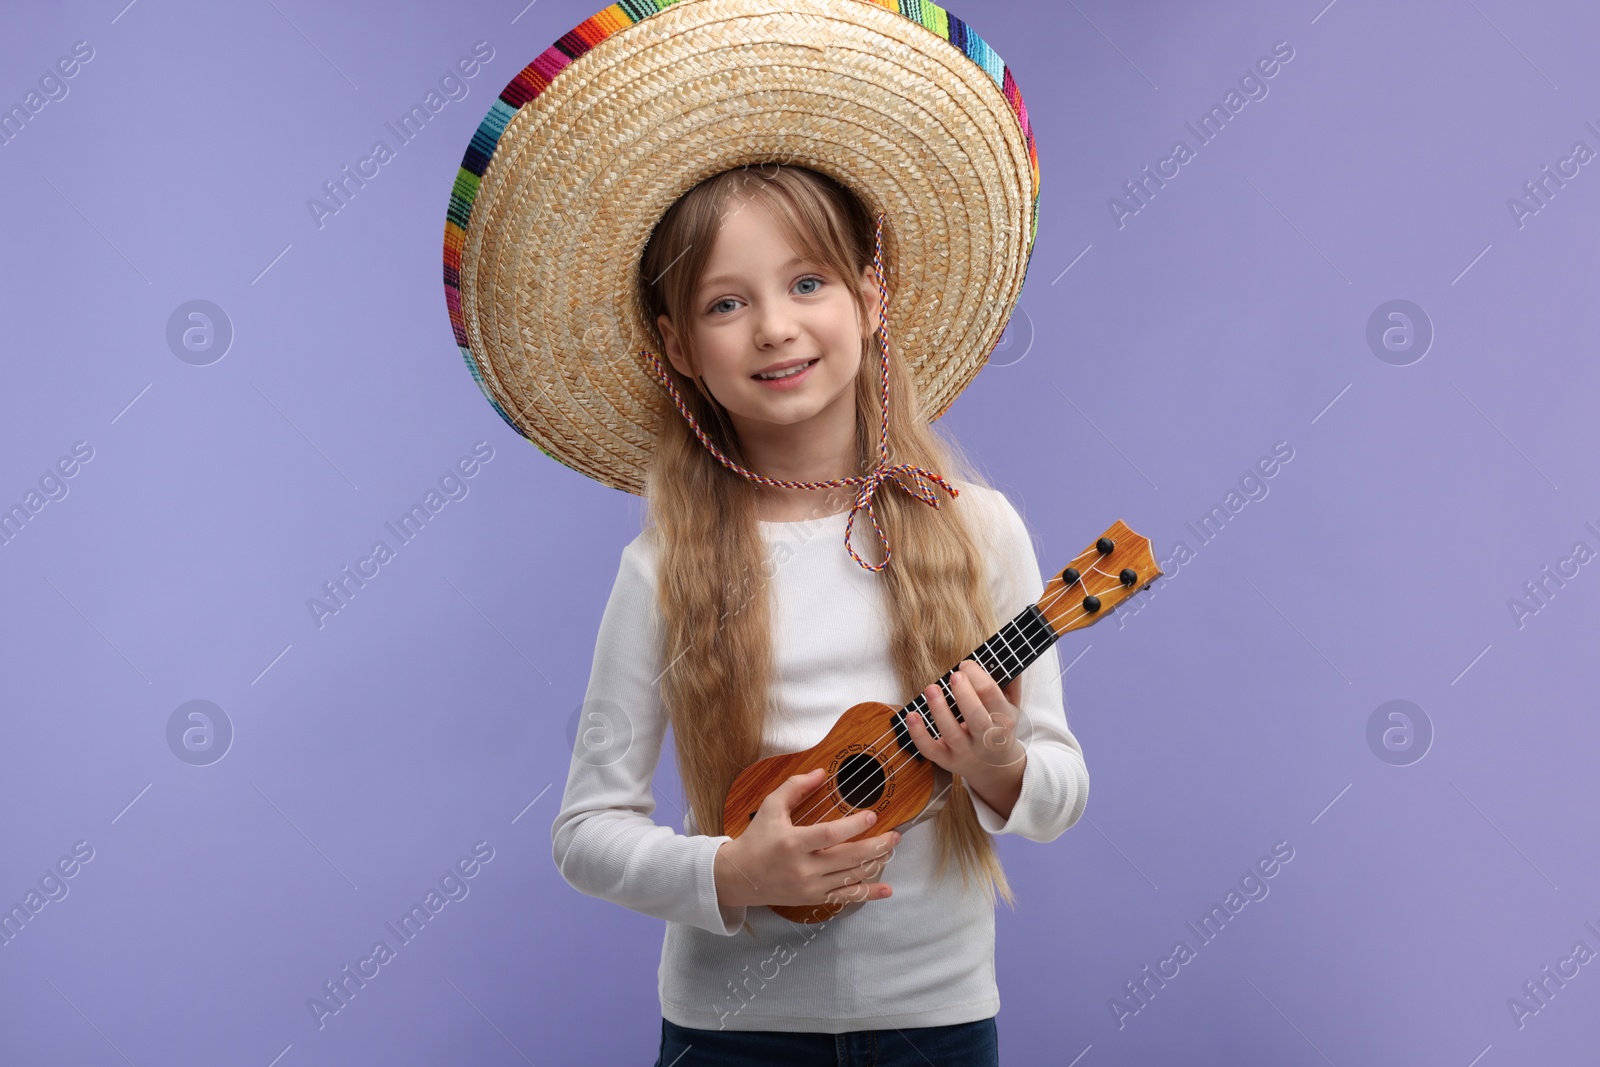 Photo of Cute girl in Mexican sombrero hat playing ukulele on purple background